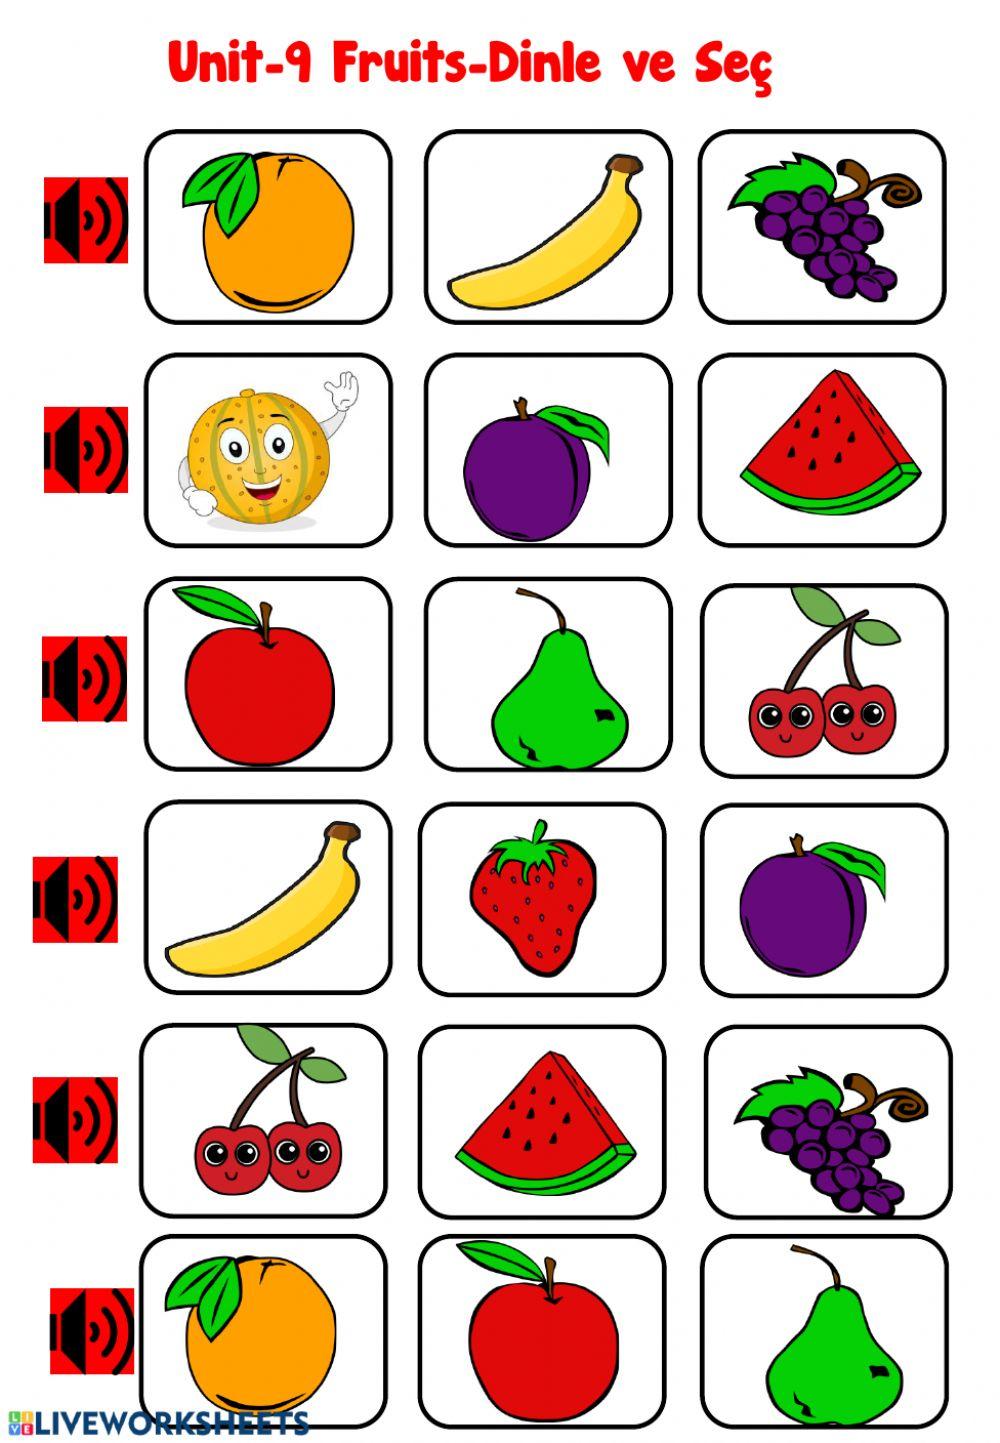 Fruits listening exercices